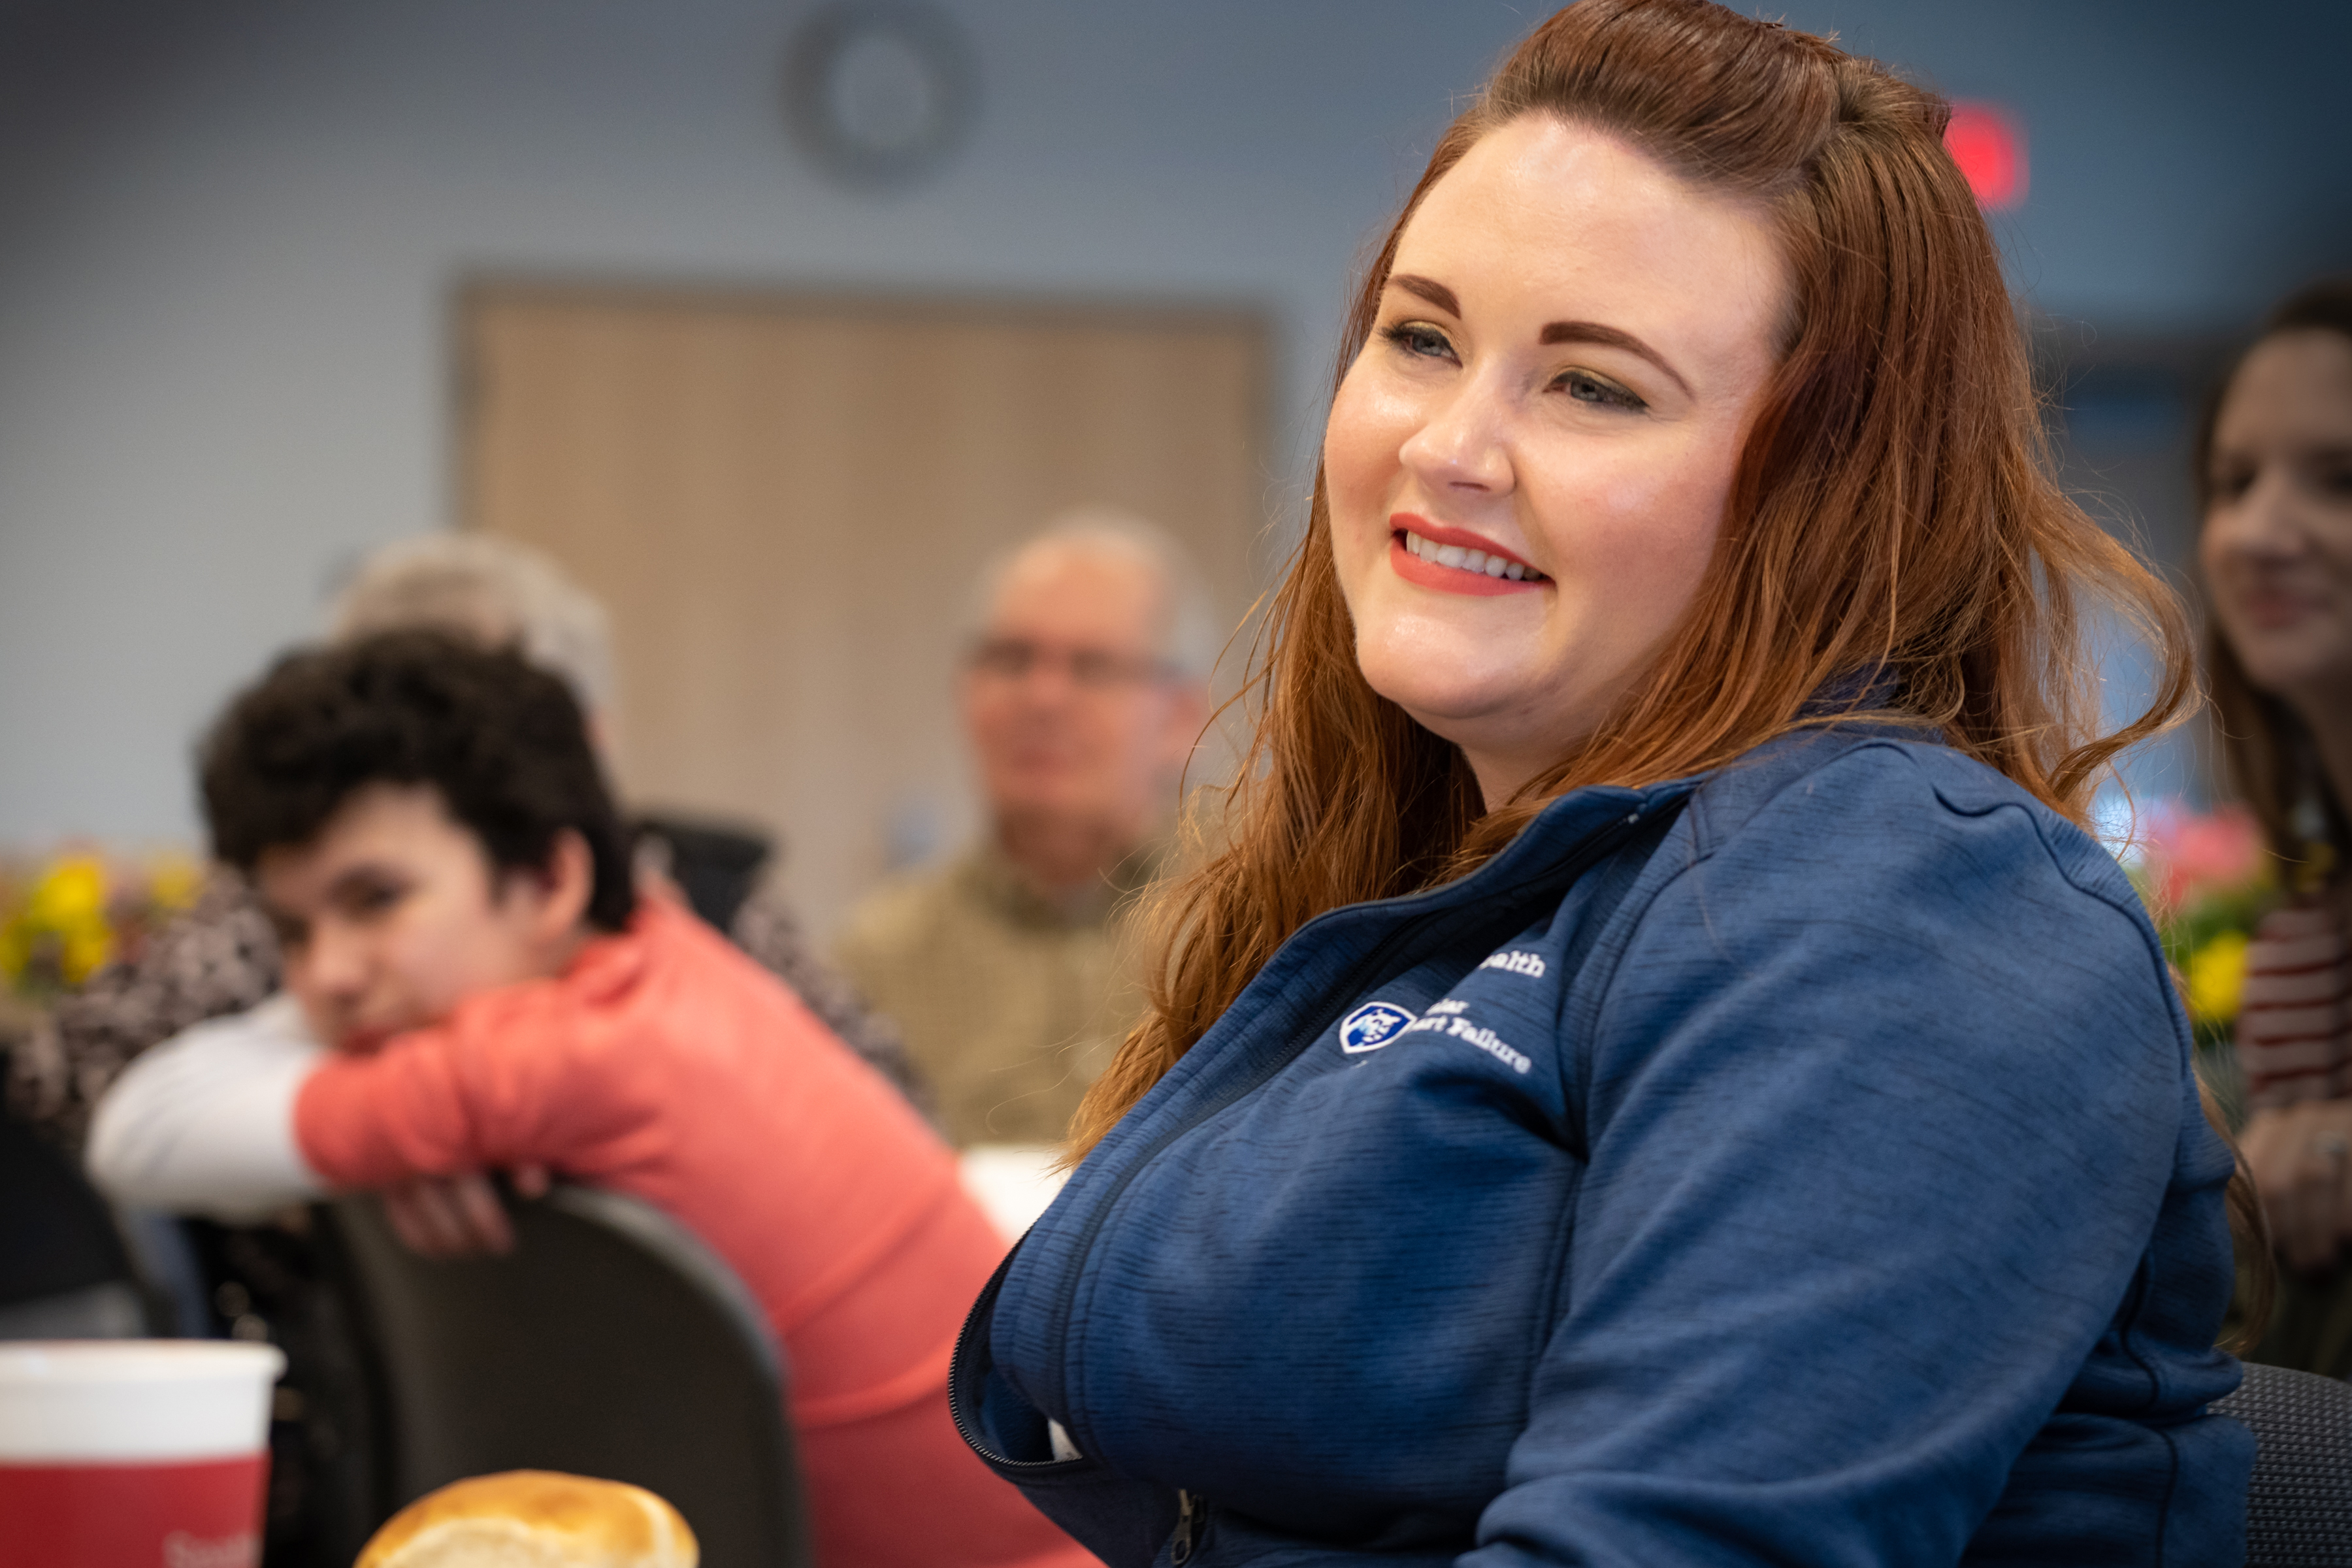 Transplant assistant Aimee Zehring smiles as she listens to Al Dolatoski’s thank you speech during the LVAD reunion. She has long hair and is wearing a Penn State Health jacket. Behind her several people sit at tables, shown out of focus.